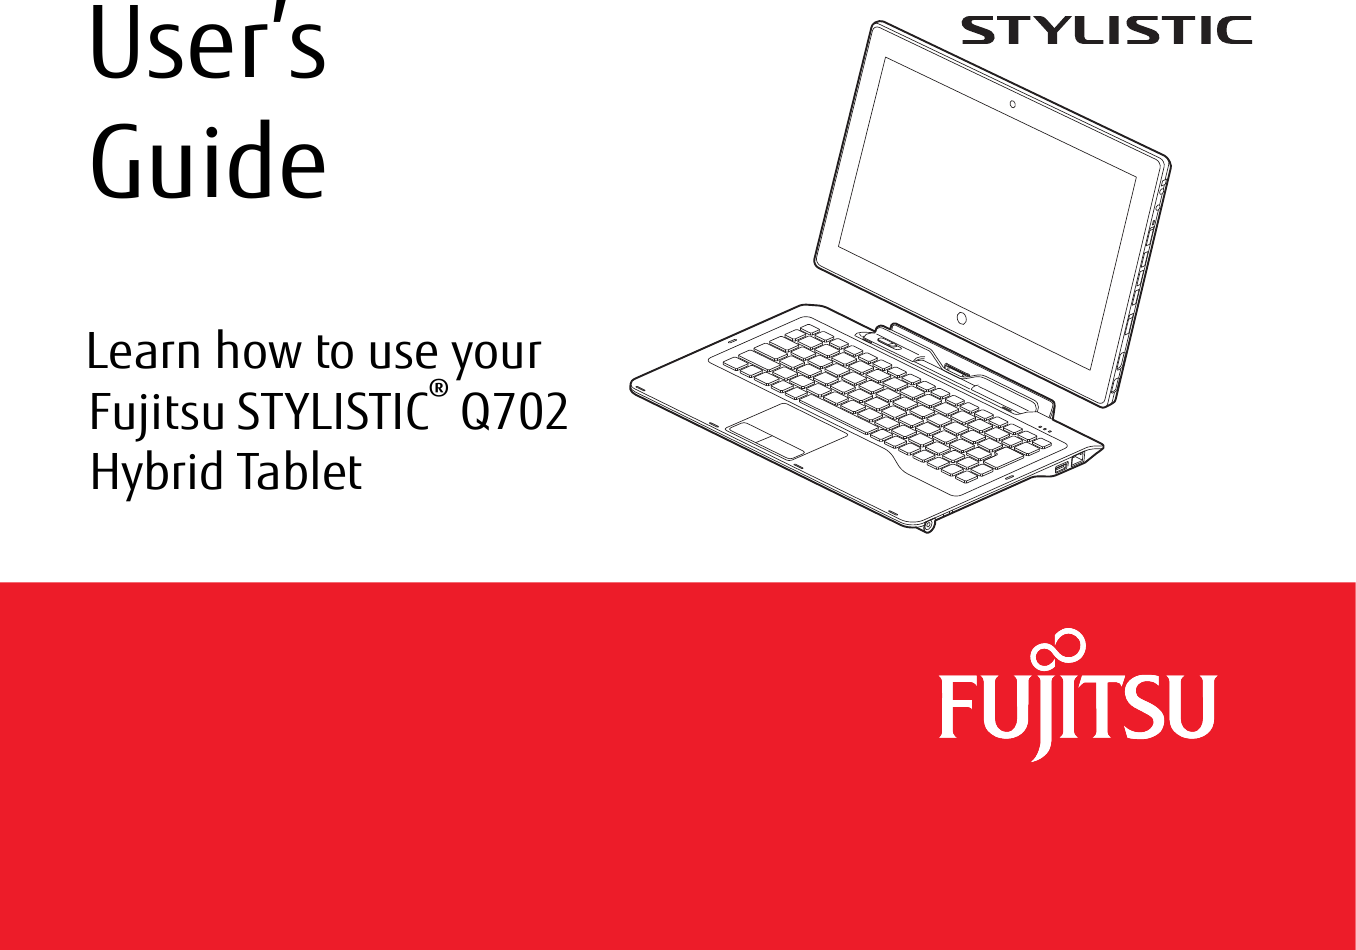  User’s GuideLearn how to use your Fujitsu STYLISTIC® Q702 Hybrid Tablet